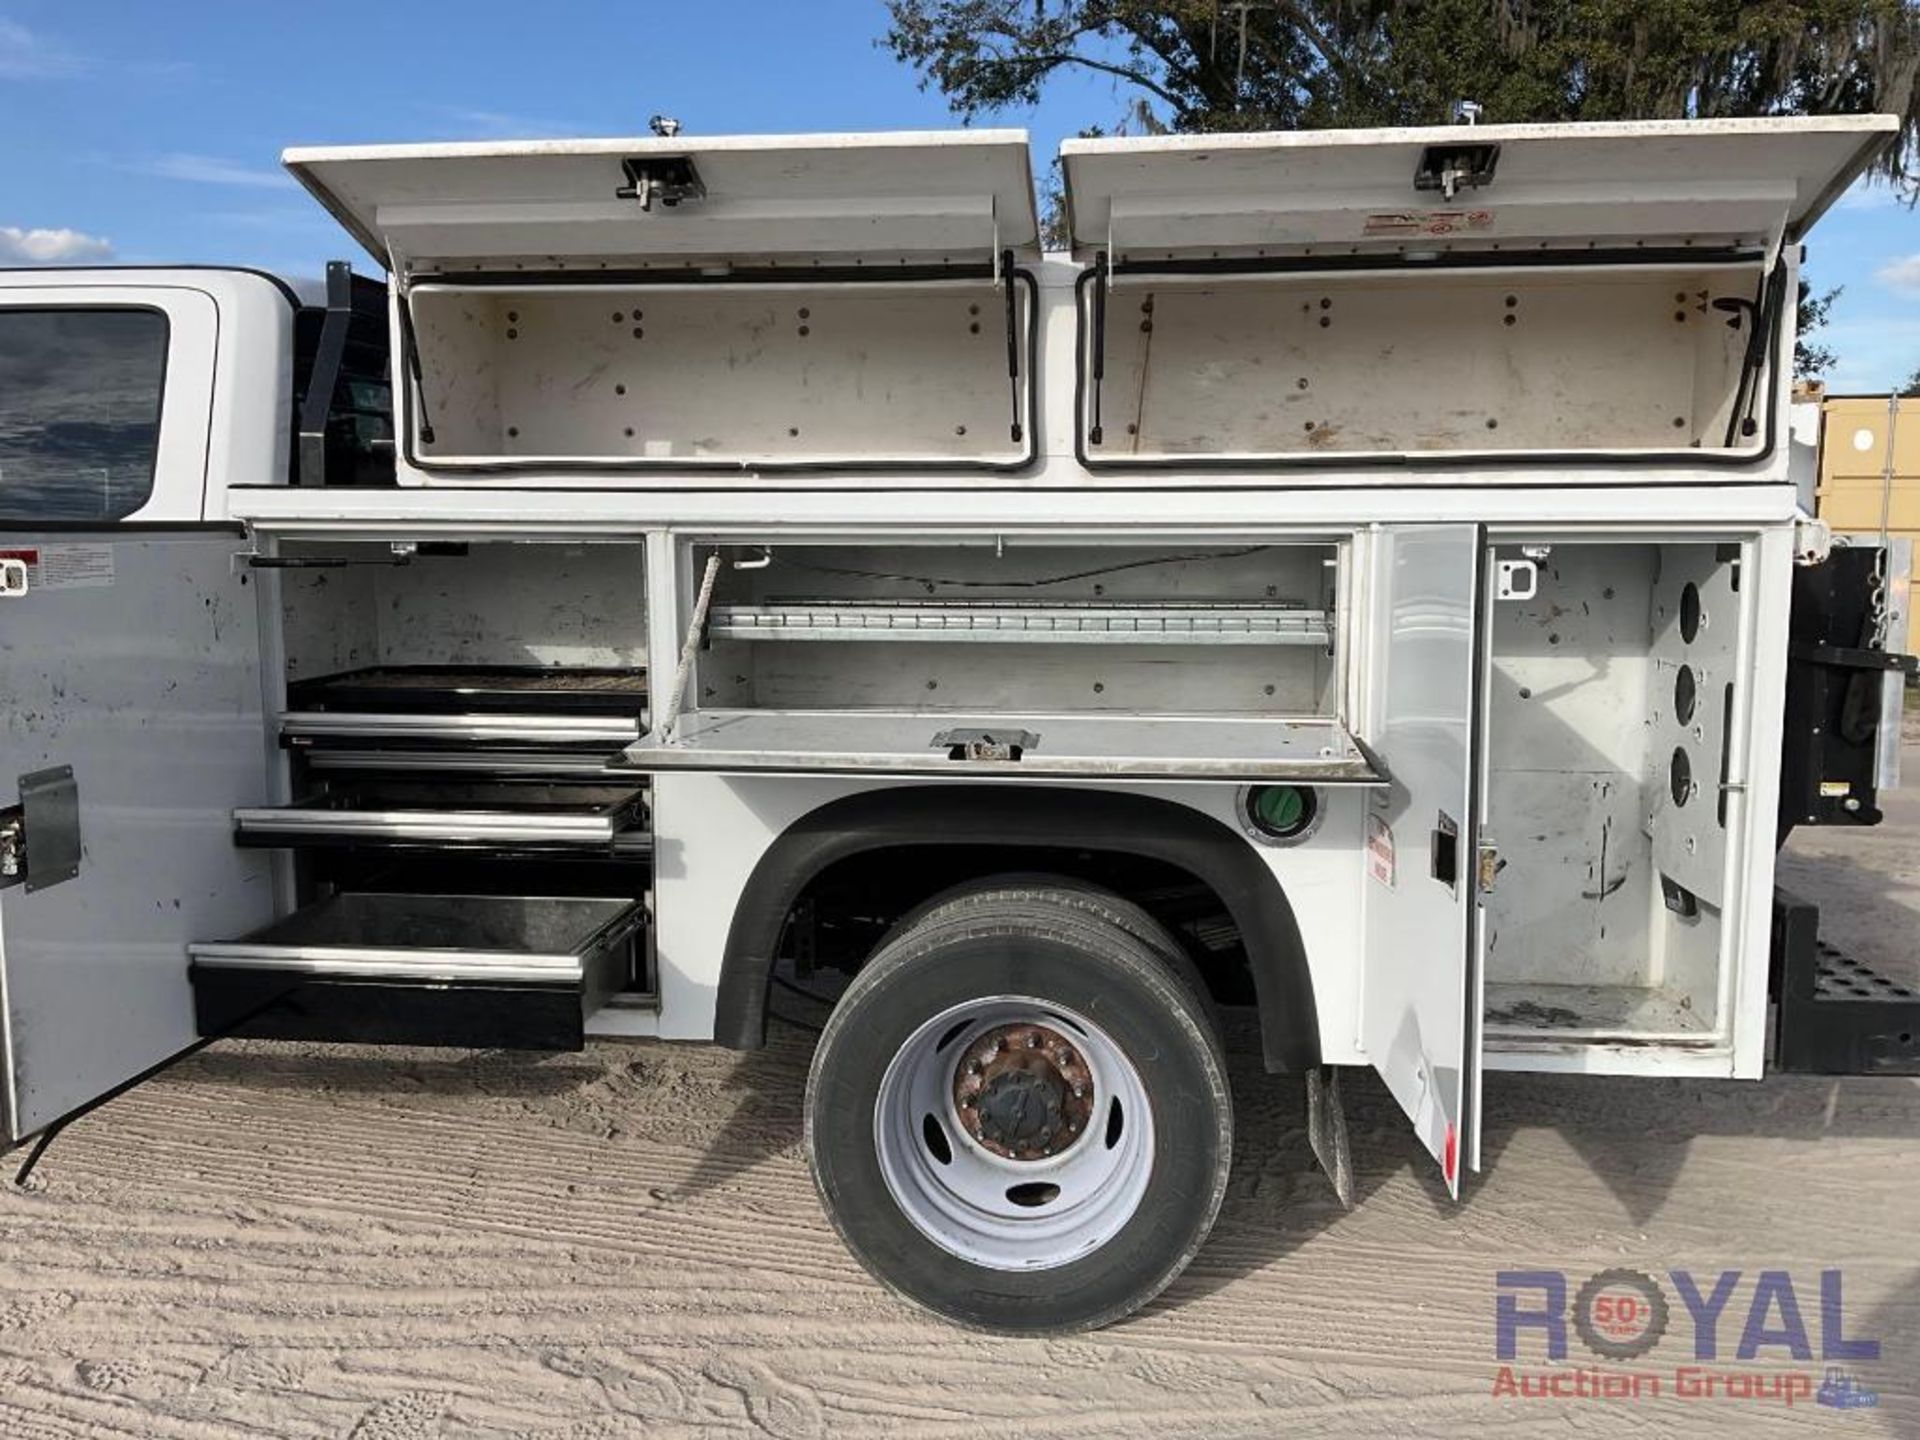 2019 F450 4x4 Service Truck - Image 13 of 34